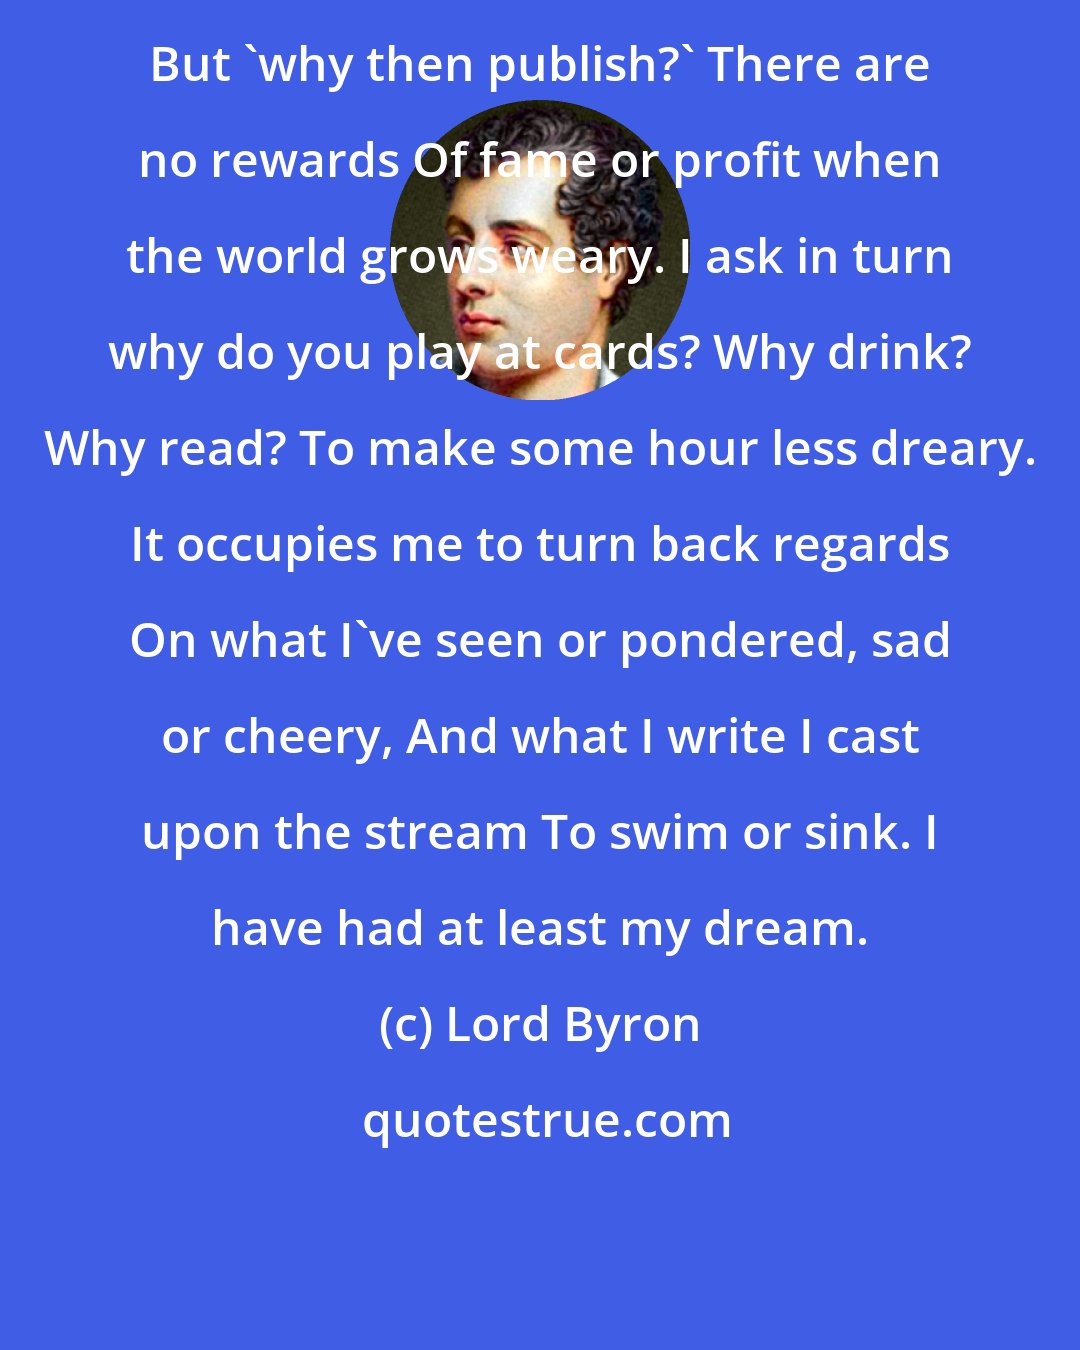 Lord Byron: But 'why then publish?' There are no rewards Of fame or profit when the world grows weary. I ask in turn why do you play at cards? Why drink? Why read? To make some hour less dreary. It occupies me to turn back regards On what I've seen or pondered, sad or cheery, And what I write I cast upon the stream To swim or sink. I have had at least my dream.